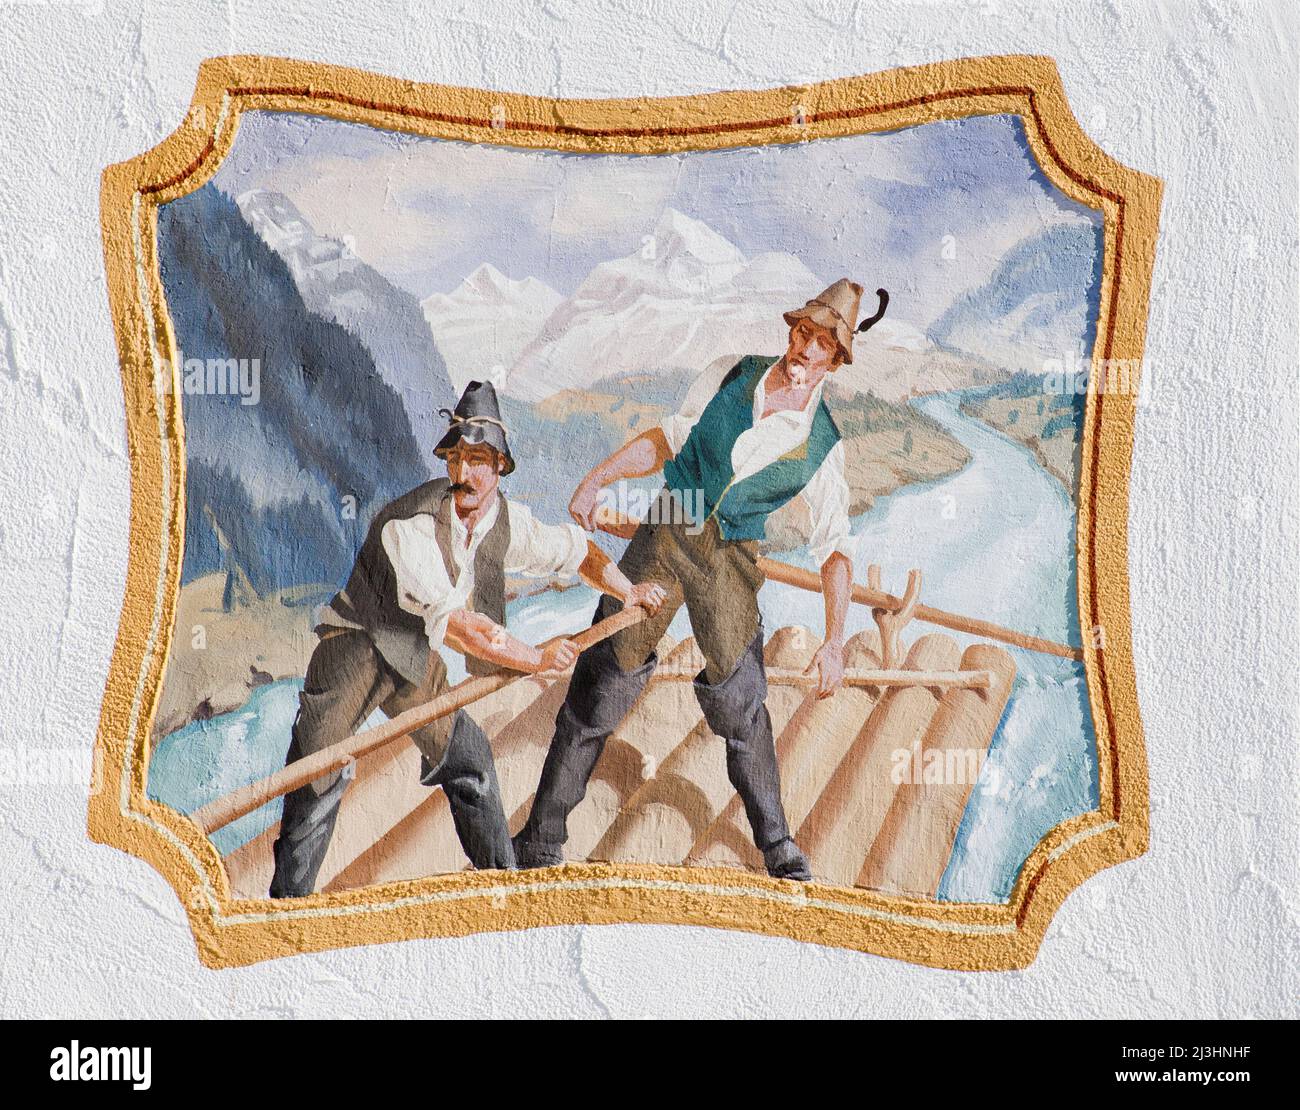 Lüftlmalerei (traditional painting) in Mittenwald, Upper Bavaria, rafting and trift (from 'treiben' in the sense of 'to float') mean transportation of floating logs. Stock Photo